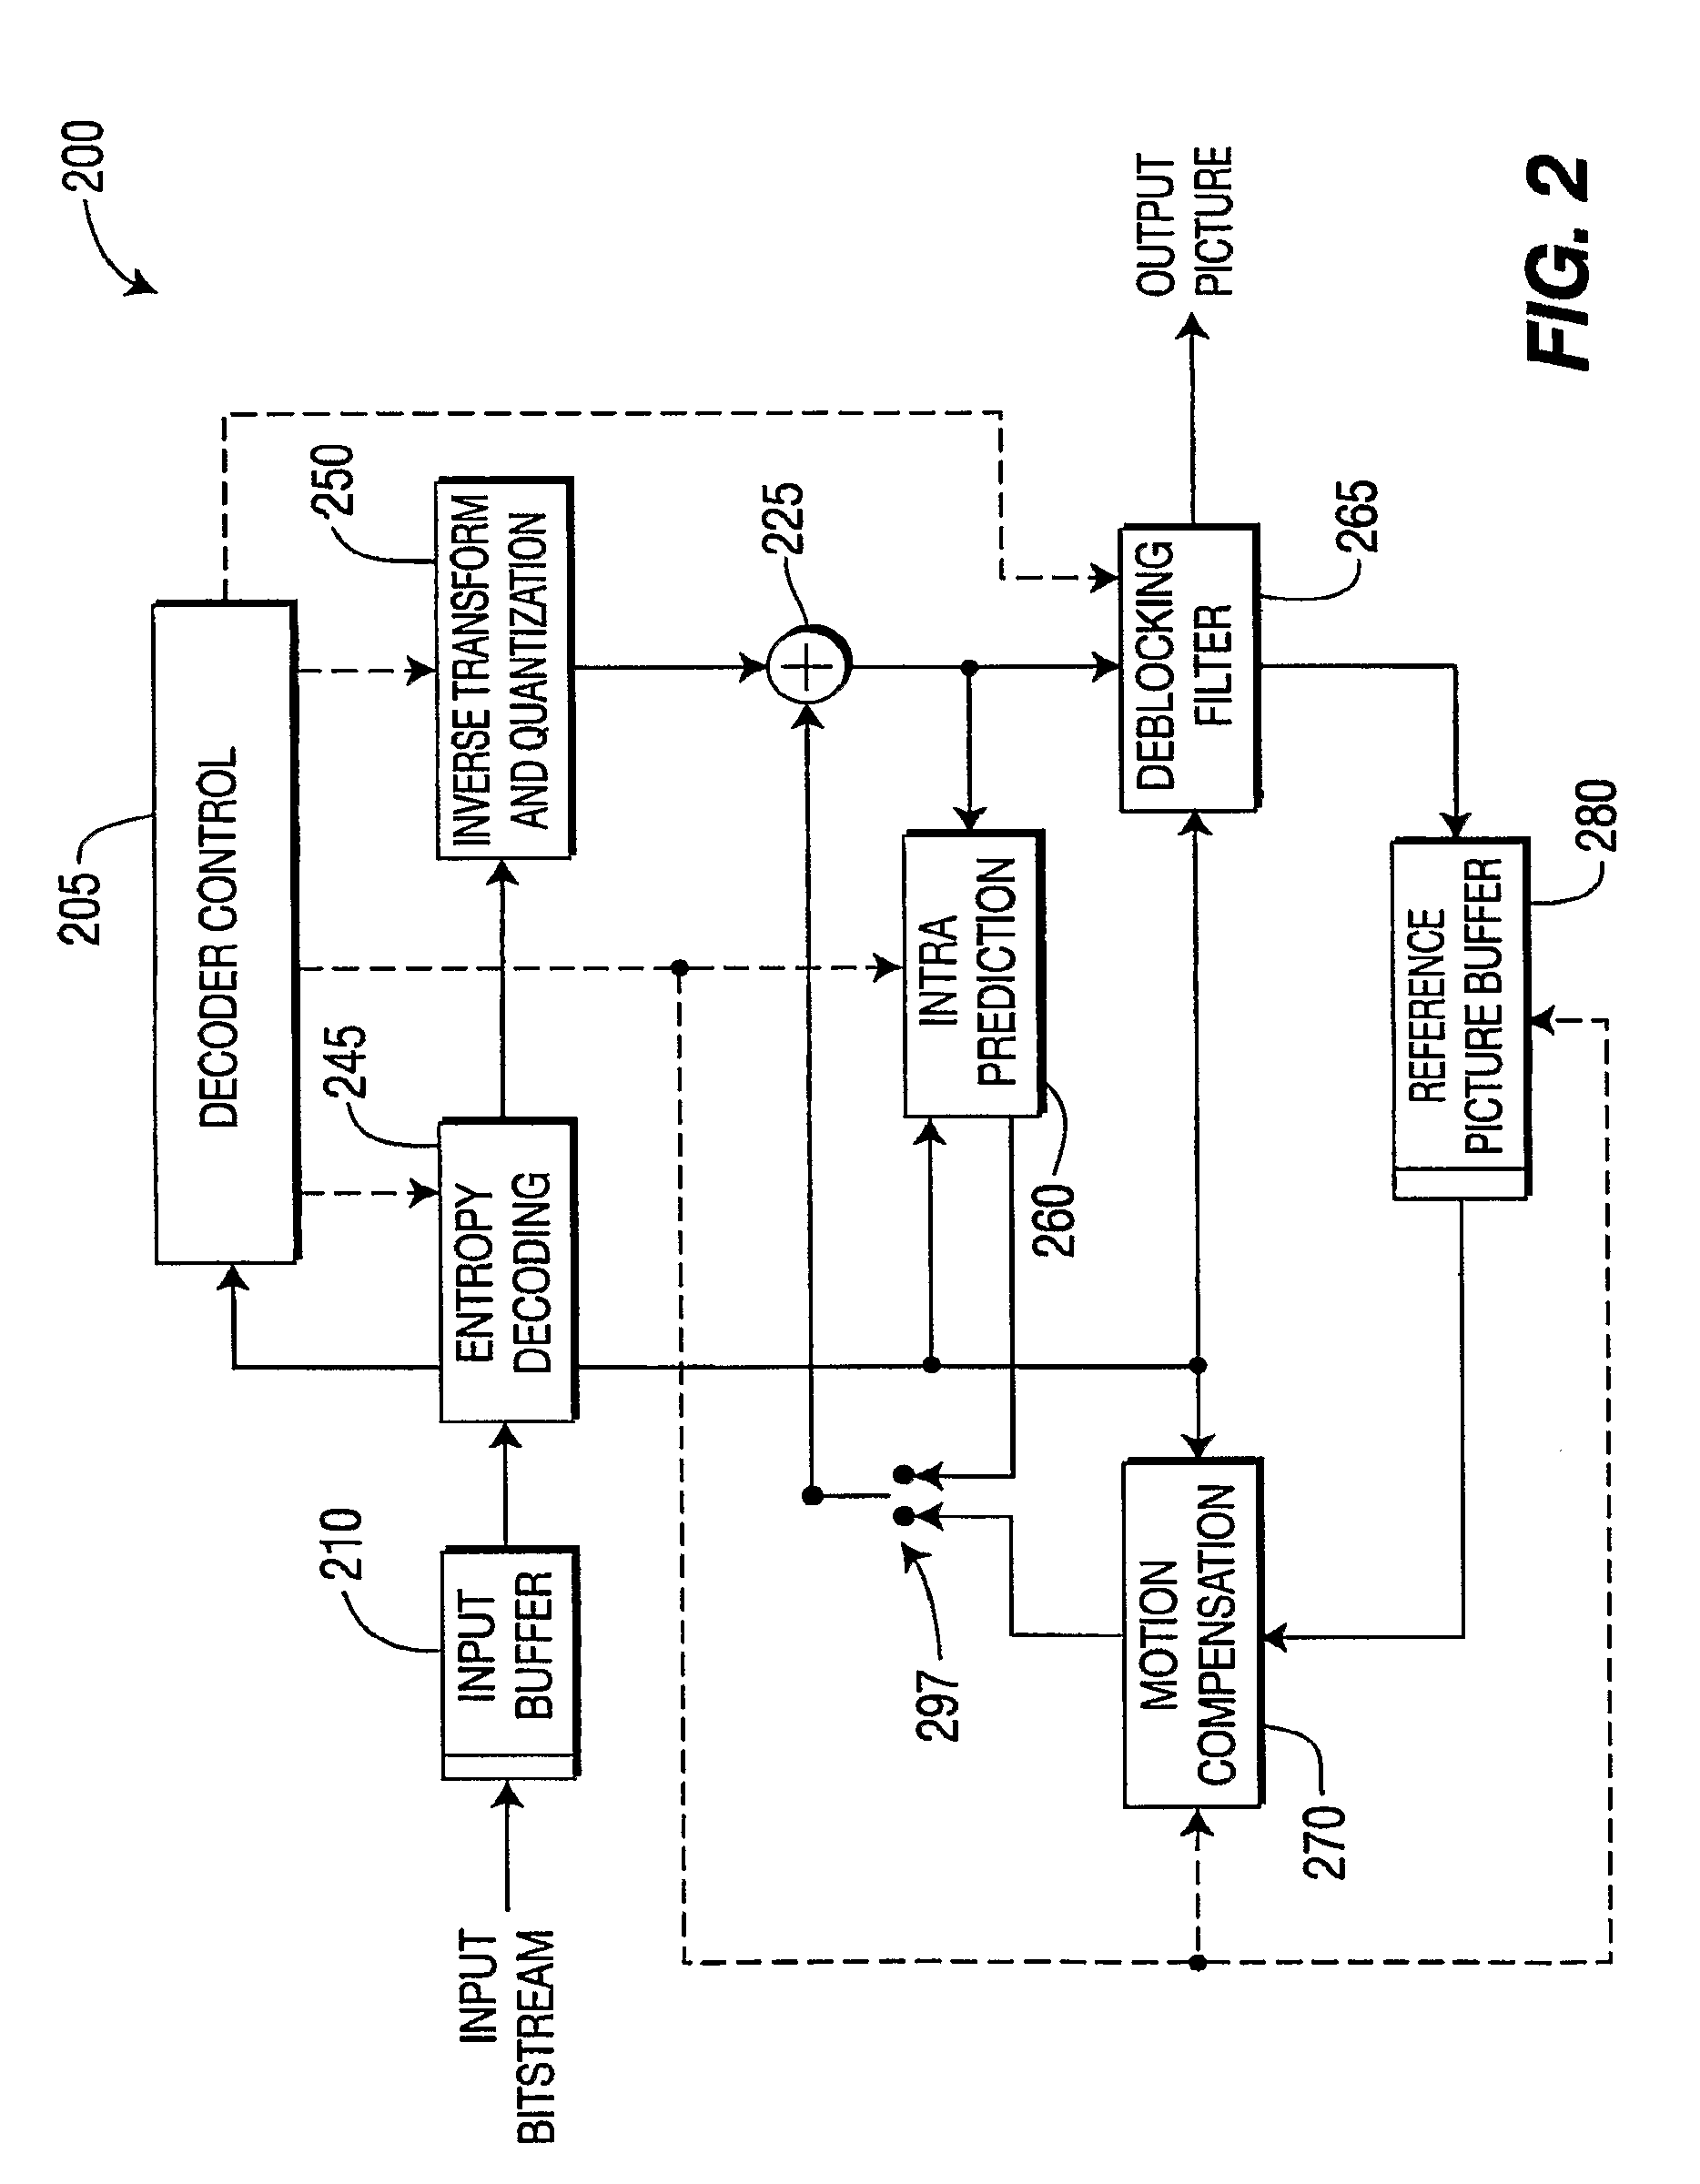 Method and apparatus for reduced resolution partitioning